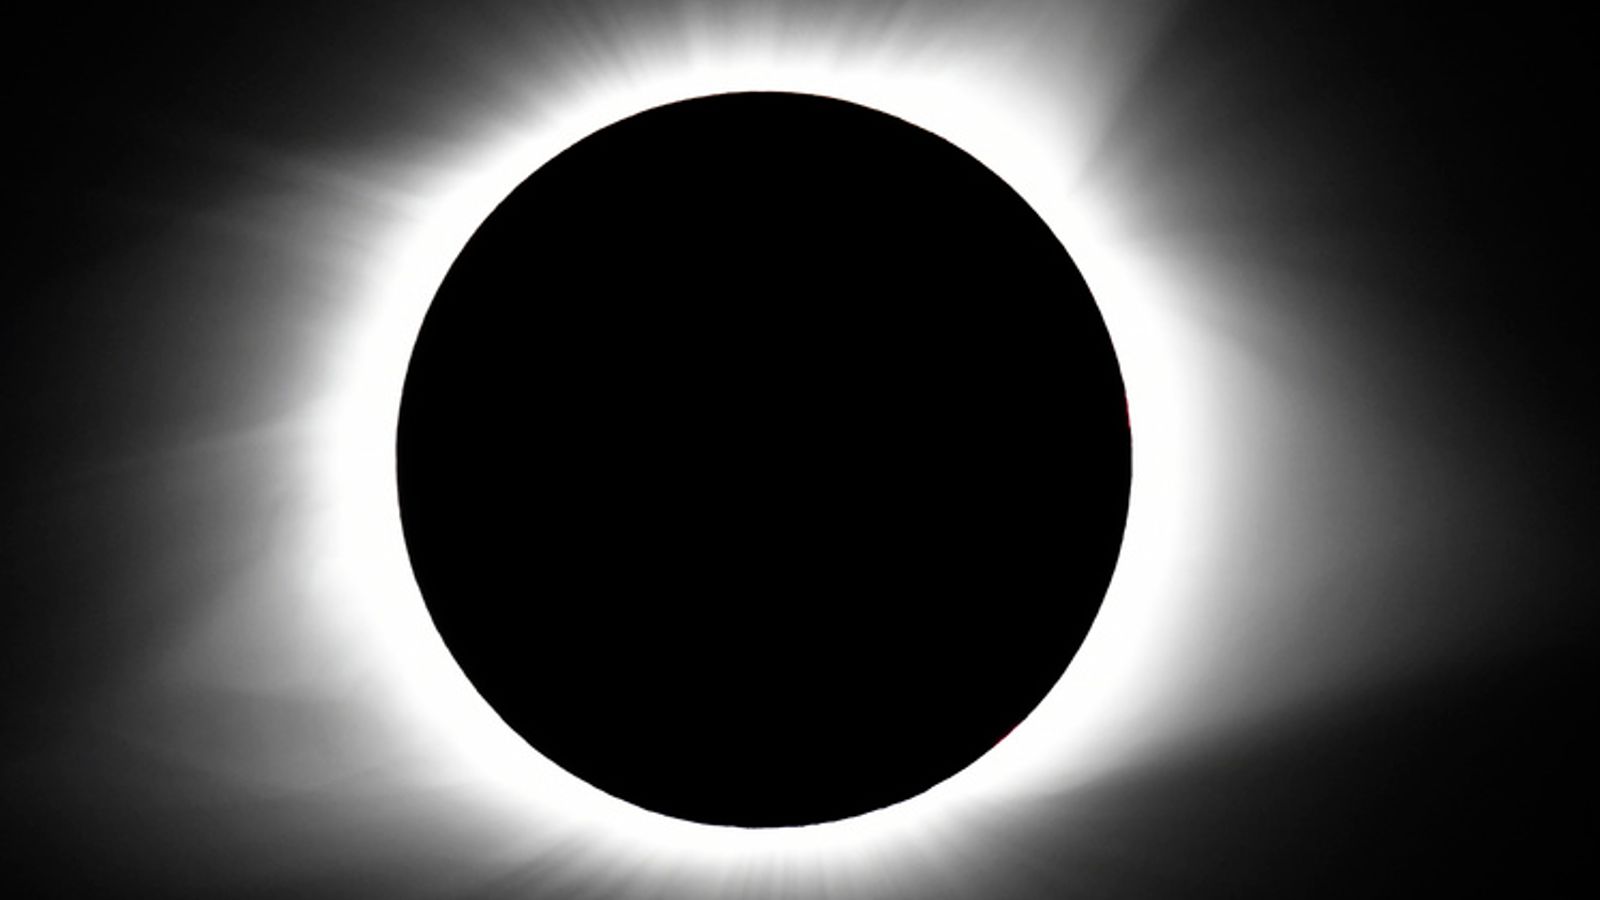 Inmates will see solar eclipse after suing New York over prison lockdown